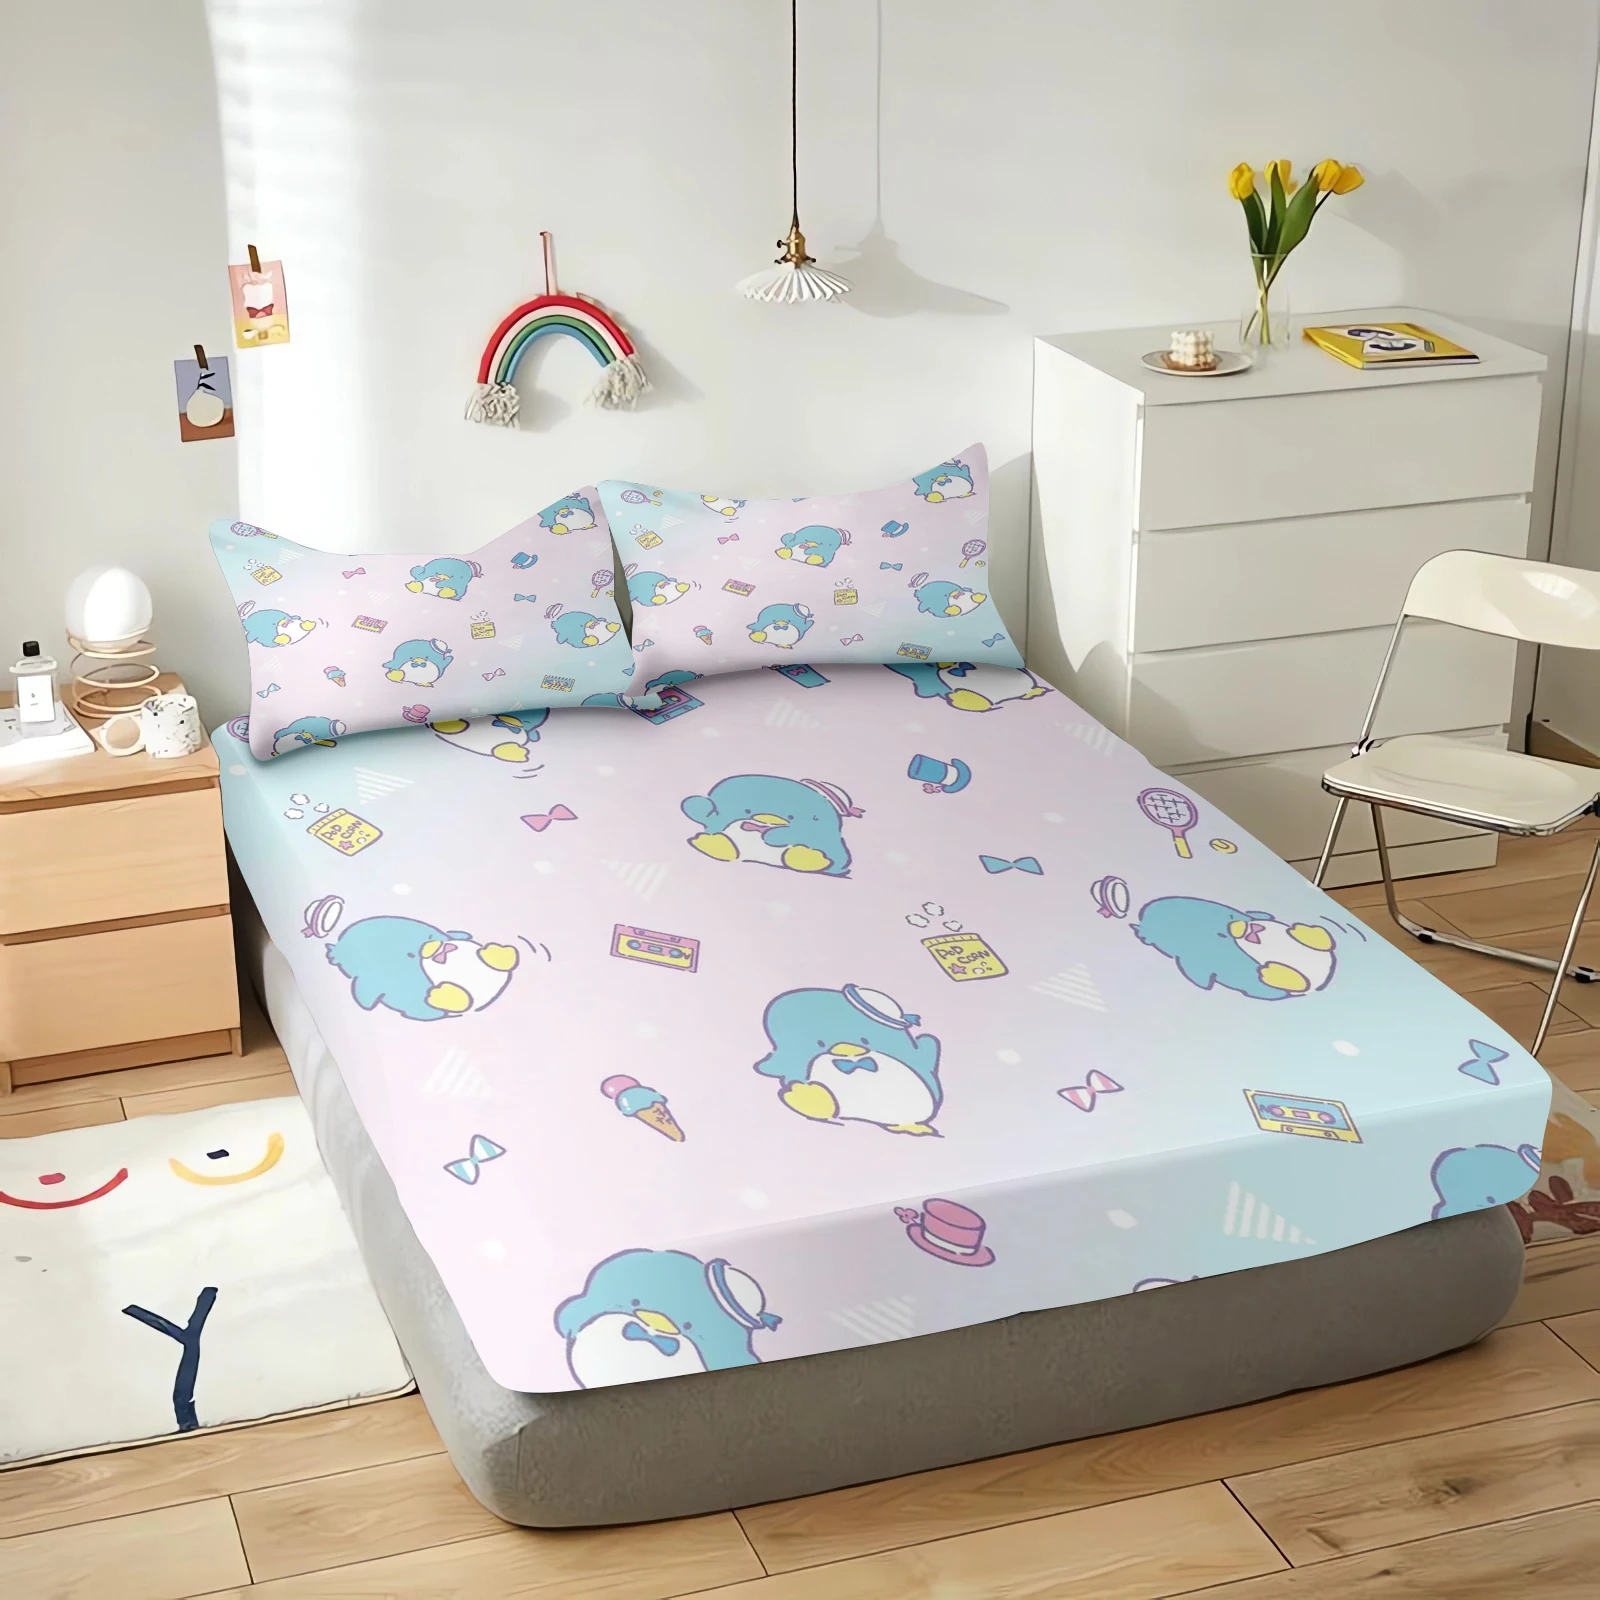 

Tuxedosam Sanrio Fitted Sheet Cartoon Coverage Sheets Cover Teenager With Elastic For Children Cute Digital Printing Bedding